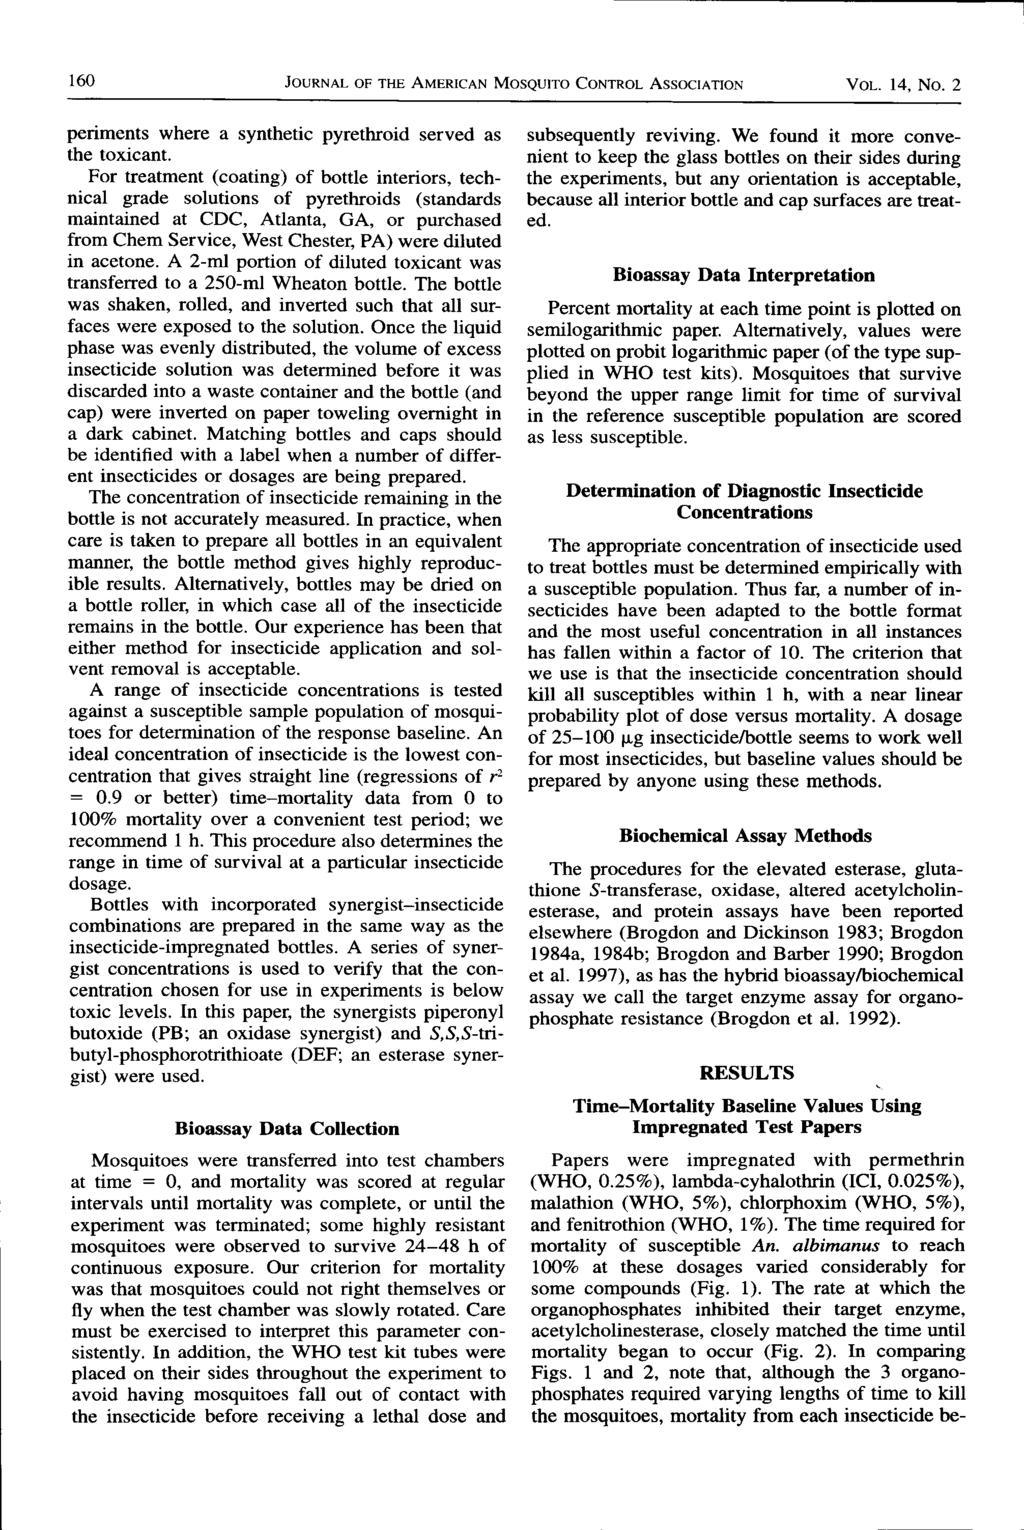 60 JounNx- or tge AusnrcAN Moseutro CoNrnoL AssocrATIoN VoL. 4, No.2 periments where a synthetic pyrethroid served as the toxicant.